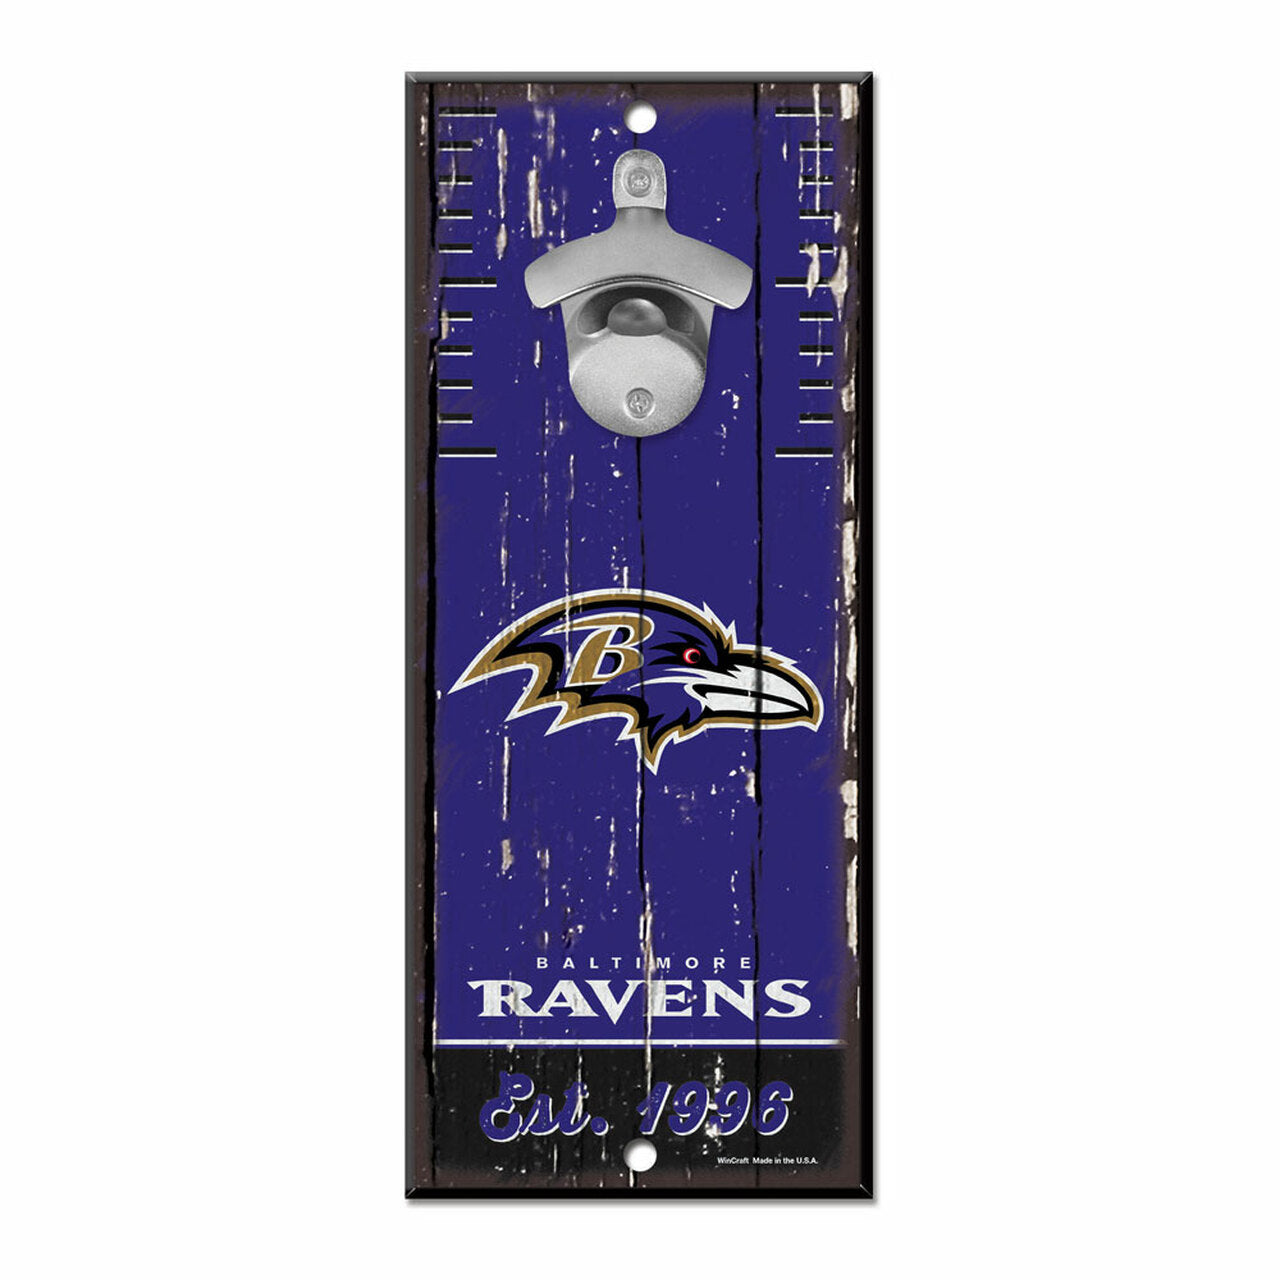 Baltimore Ravens 5x11 Bottle Opener Wood Sign - Bold team graphics, metal opener, and 2 mounting holes. Durable, made in USA by Wincraft